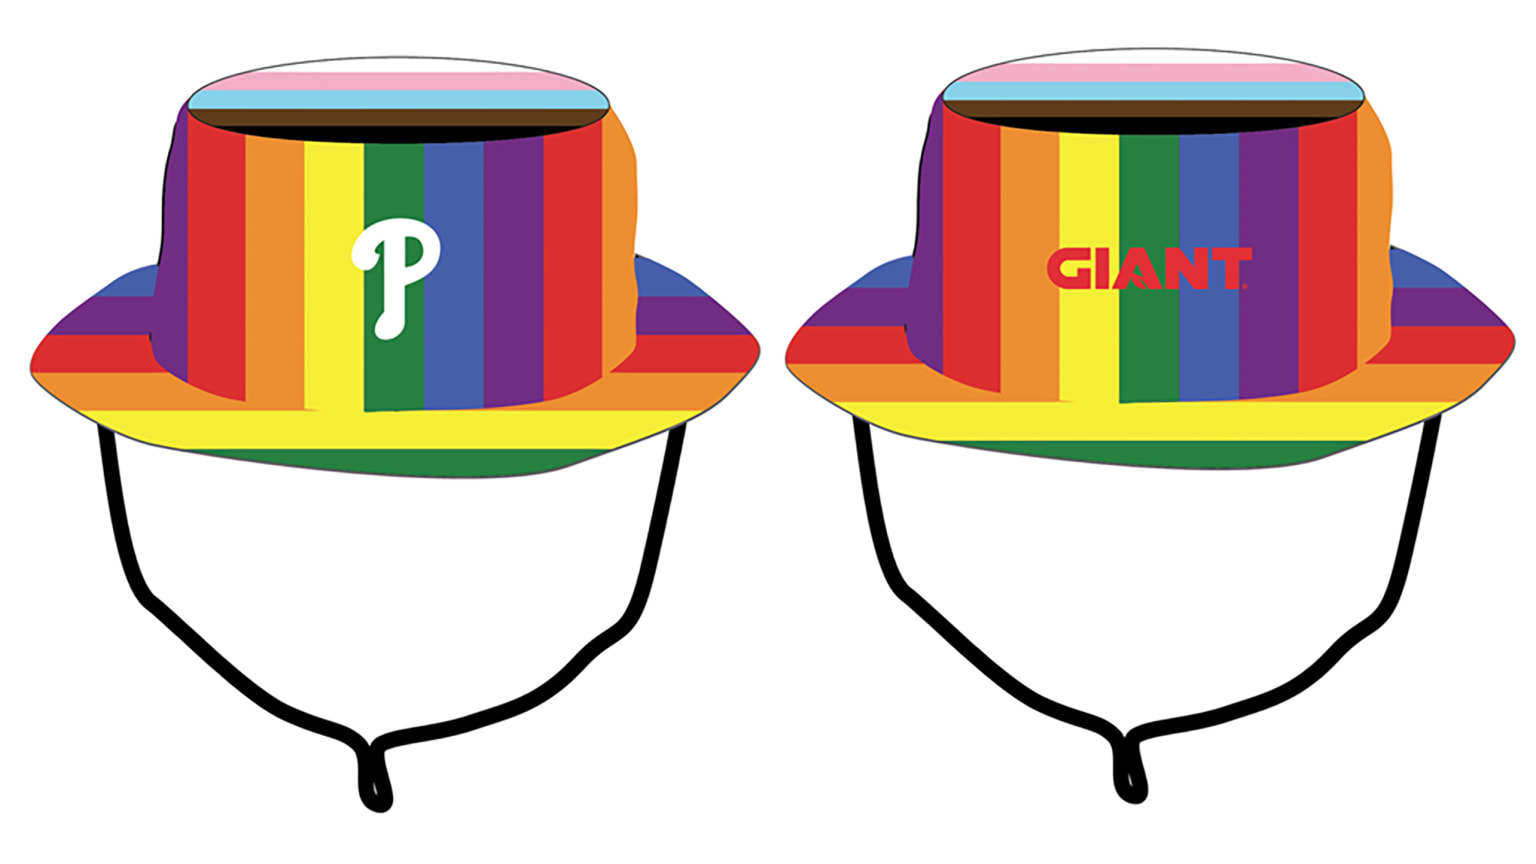 MLB Pride Month gear: Where to buy rainbow Yankees and Mets hats